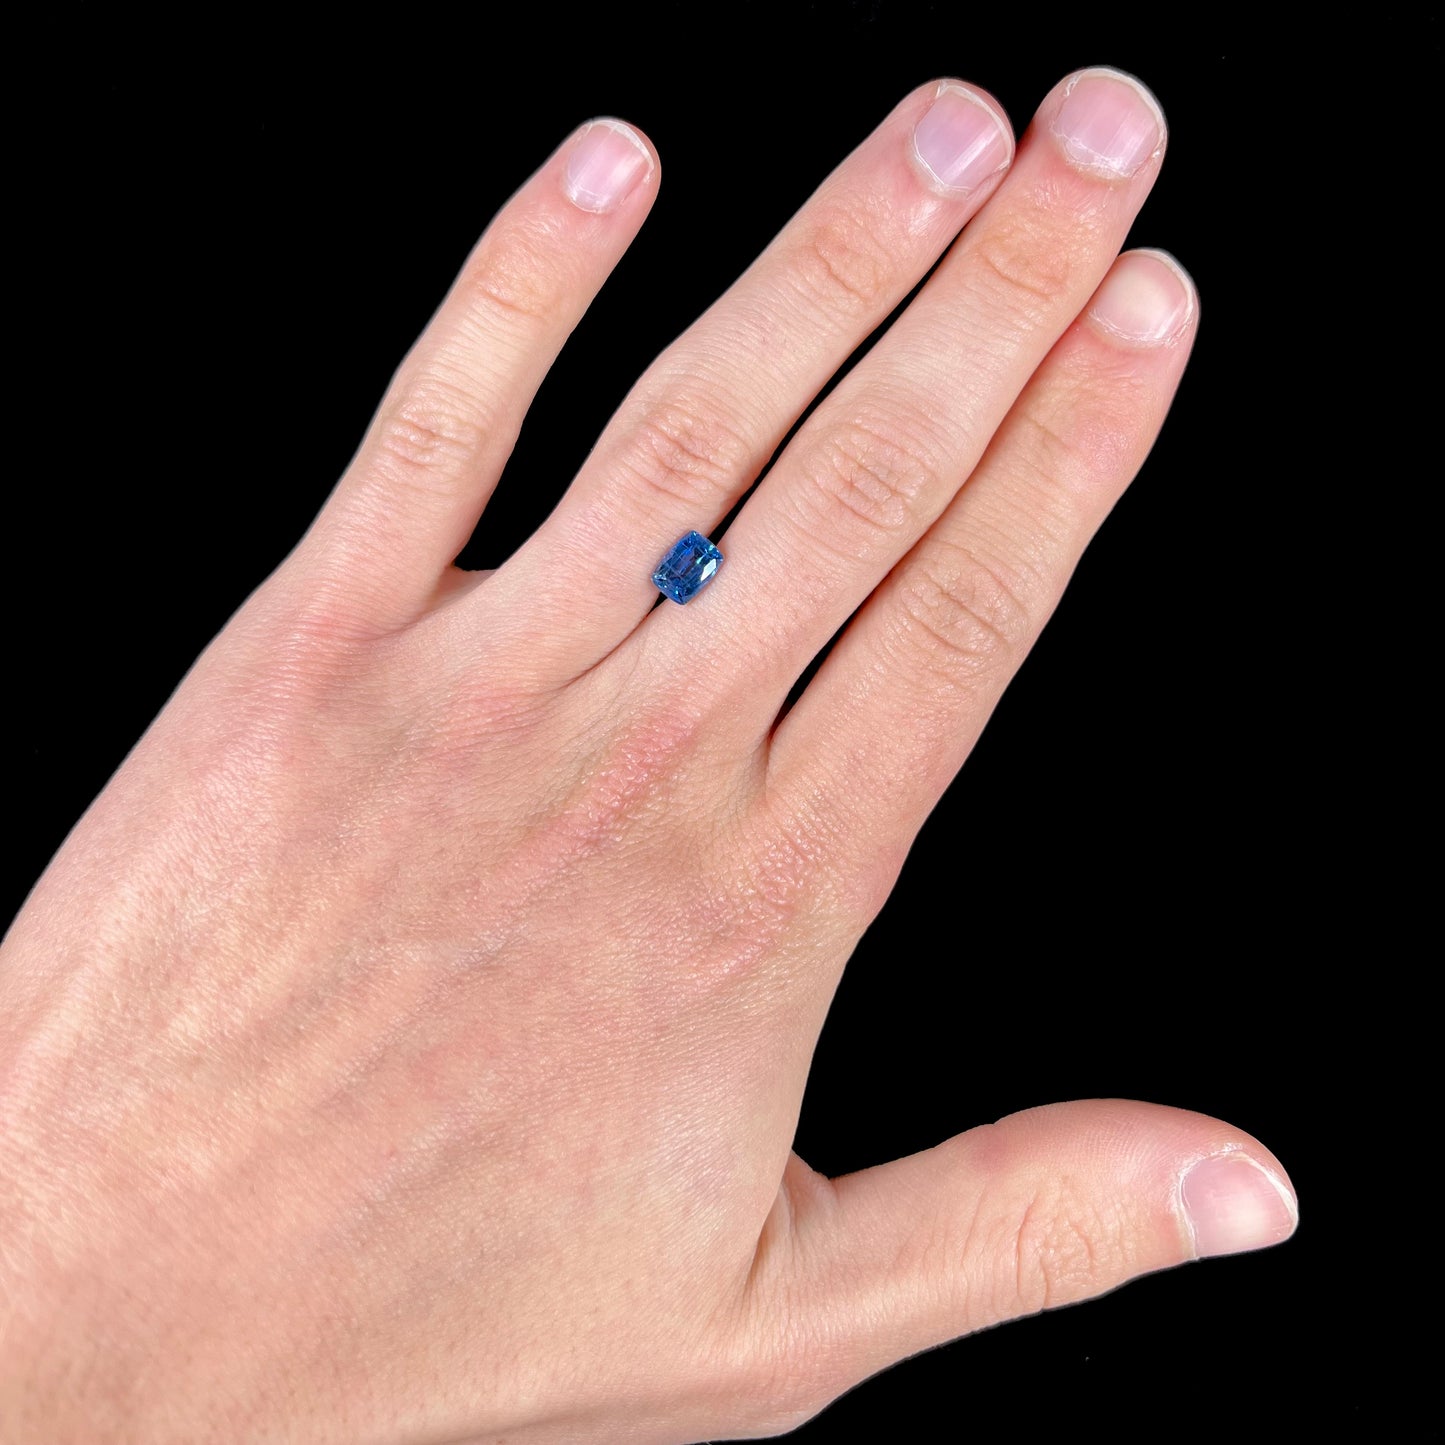 A loose, blue kyanite gemstone.  The stone is a faceted cushion cut.